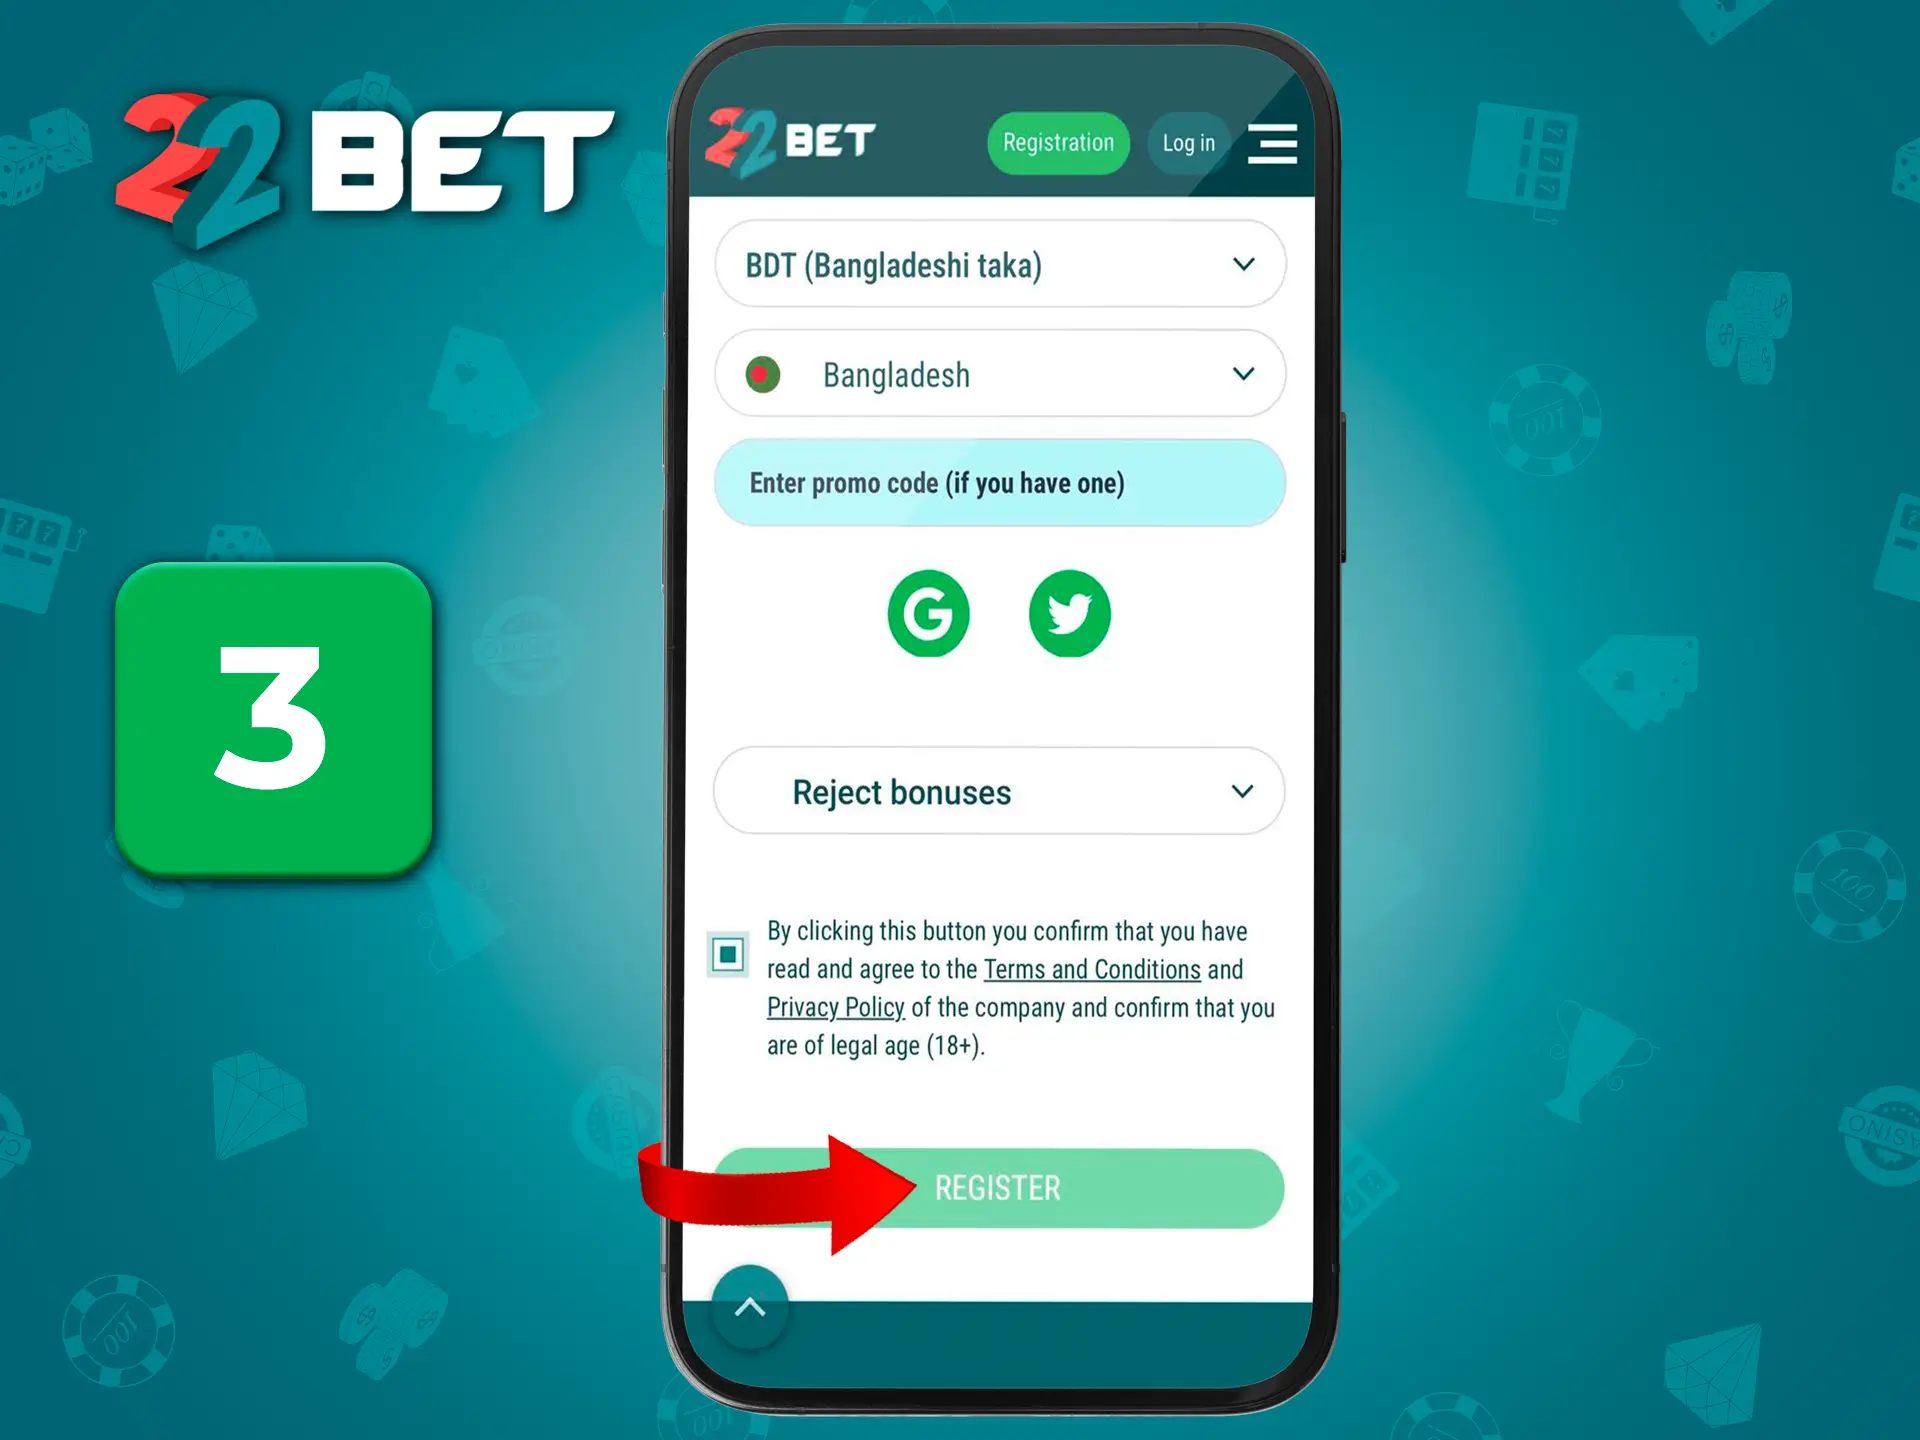 Enter your details and complete your registration at 22Bet Casino.